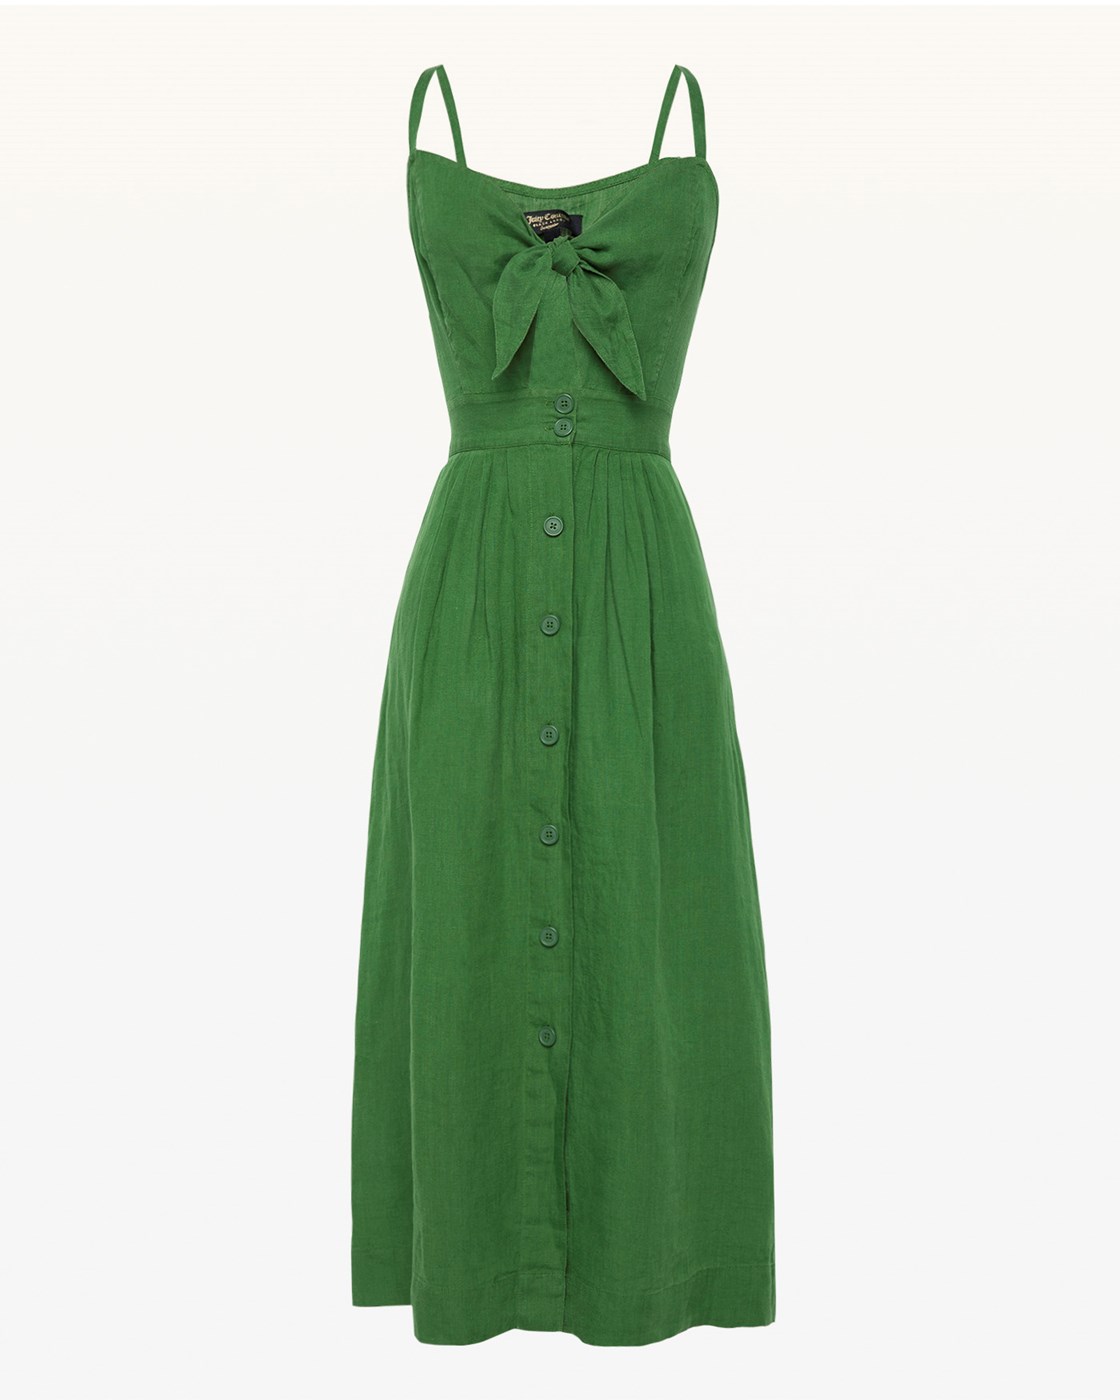 Juicy Couture Washed Linen Dress